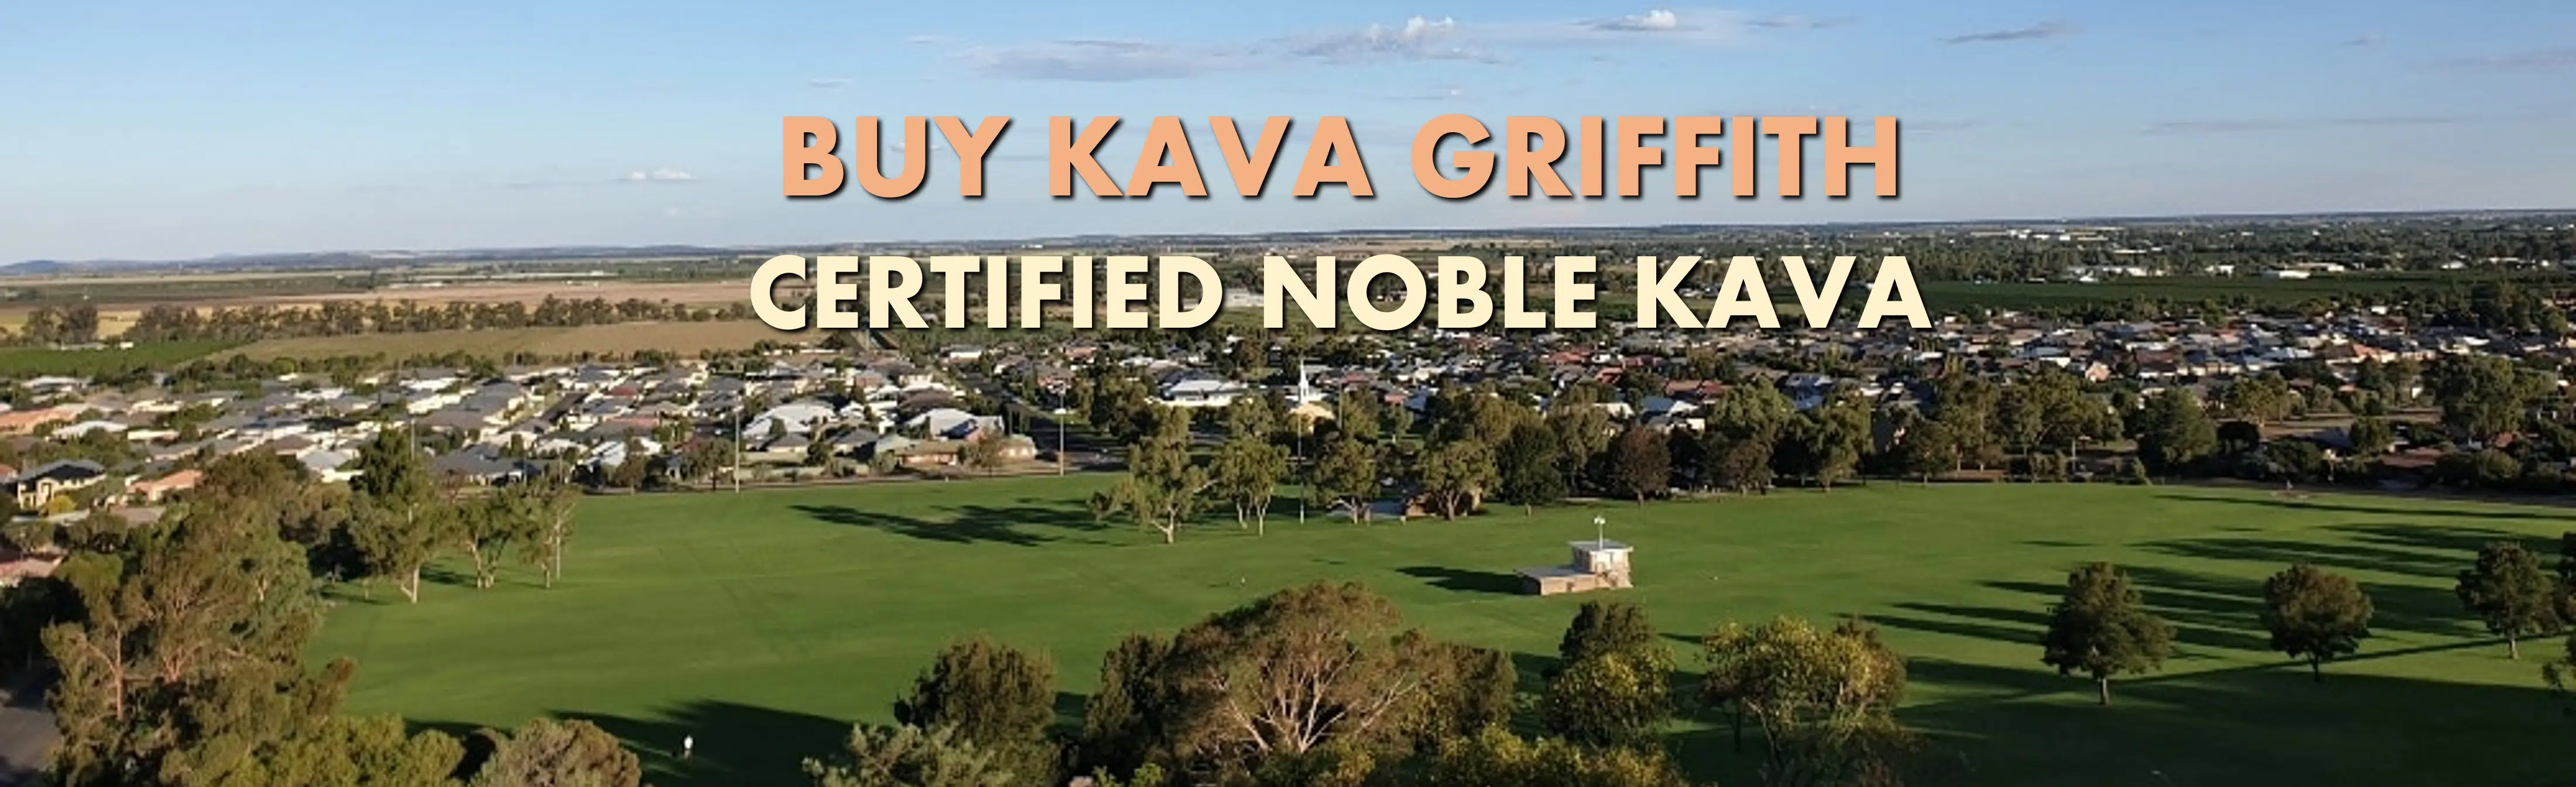 Aerial view of Griffith New South Wales with caption Buy Kava Griffith Certified Noble Kava